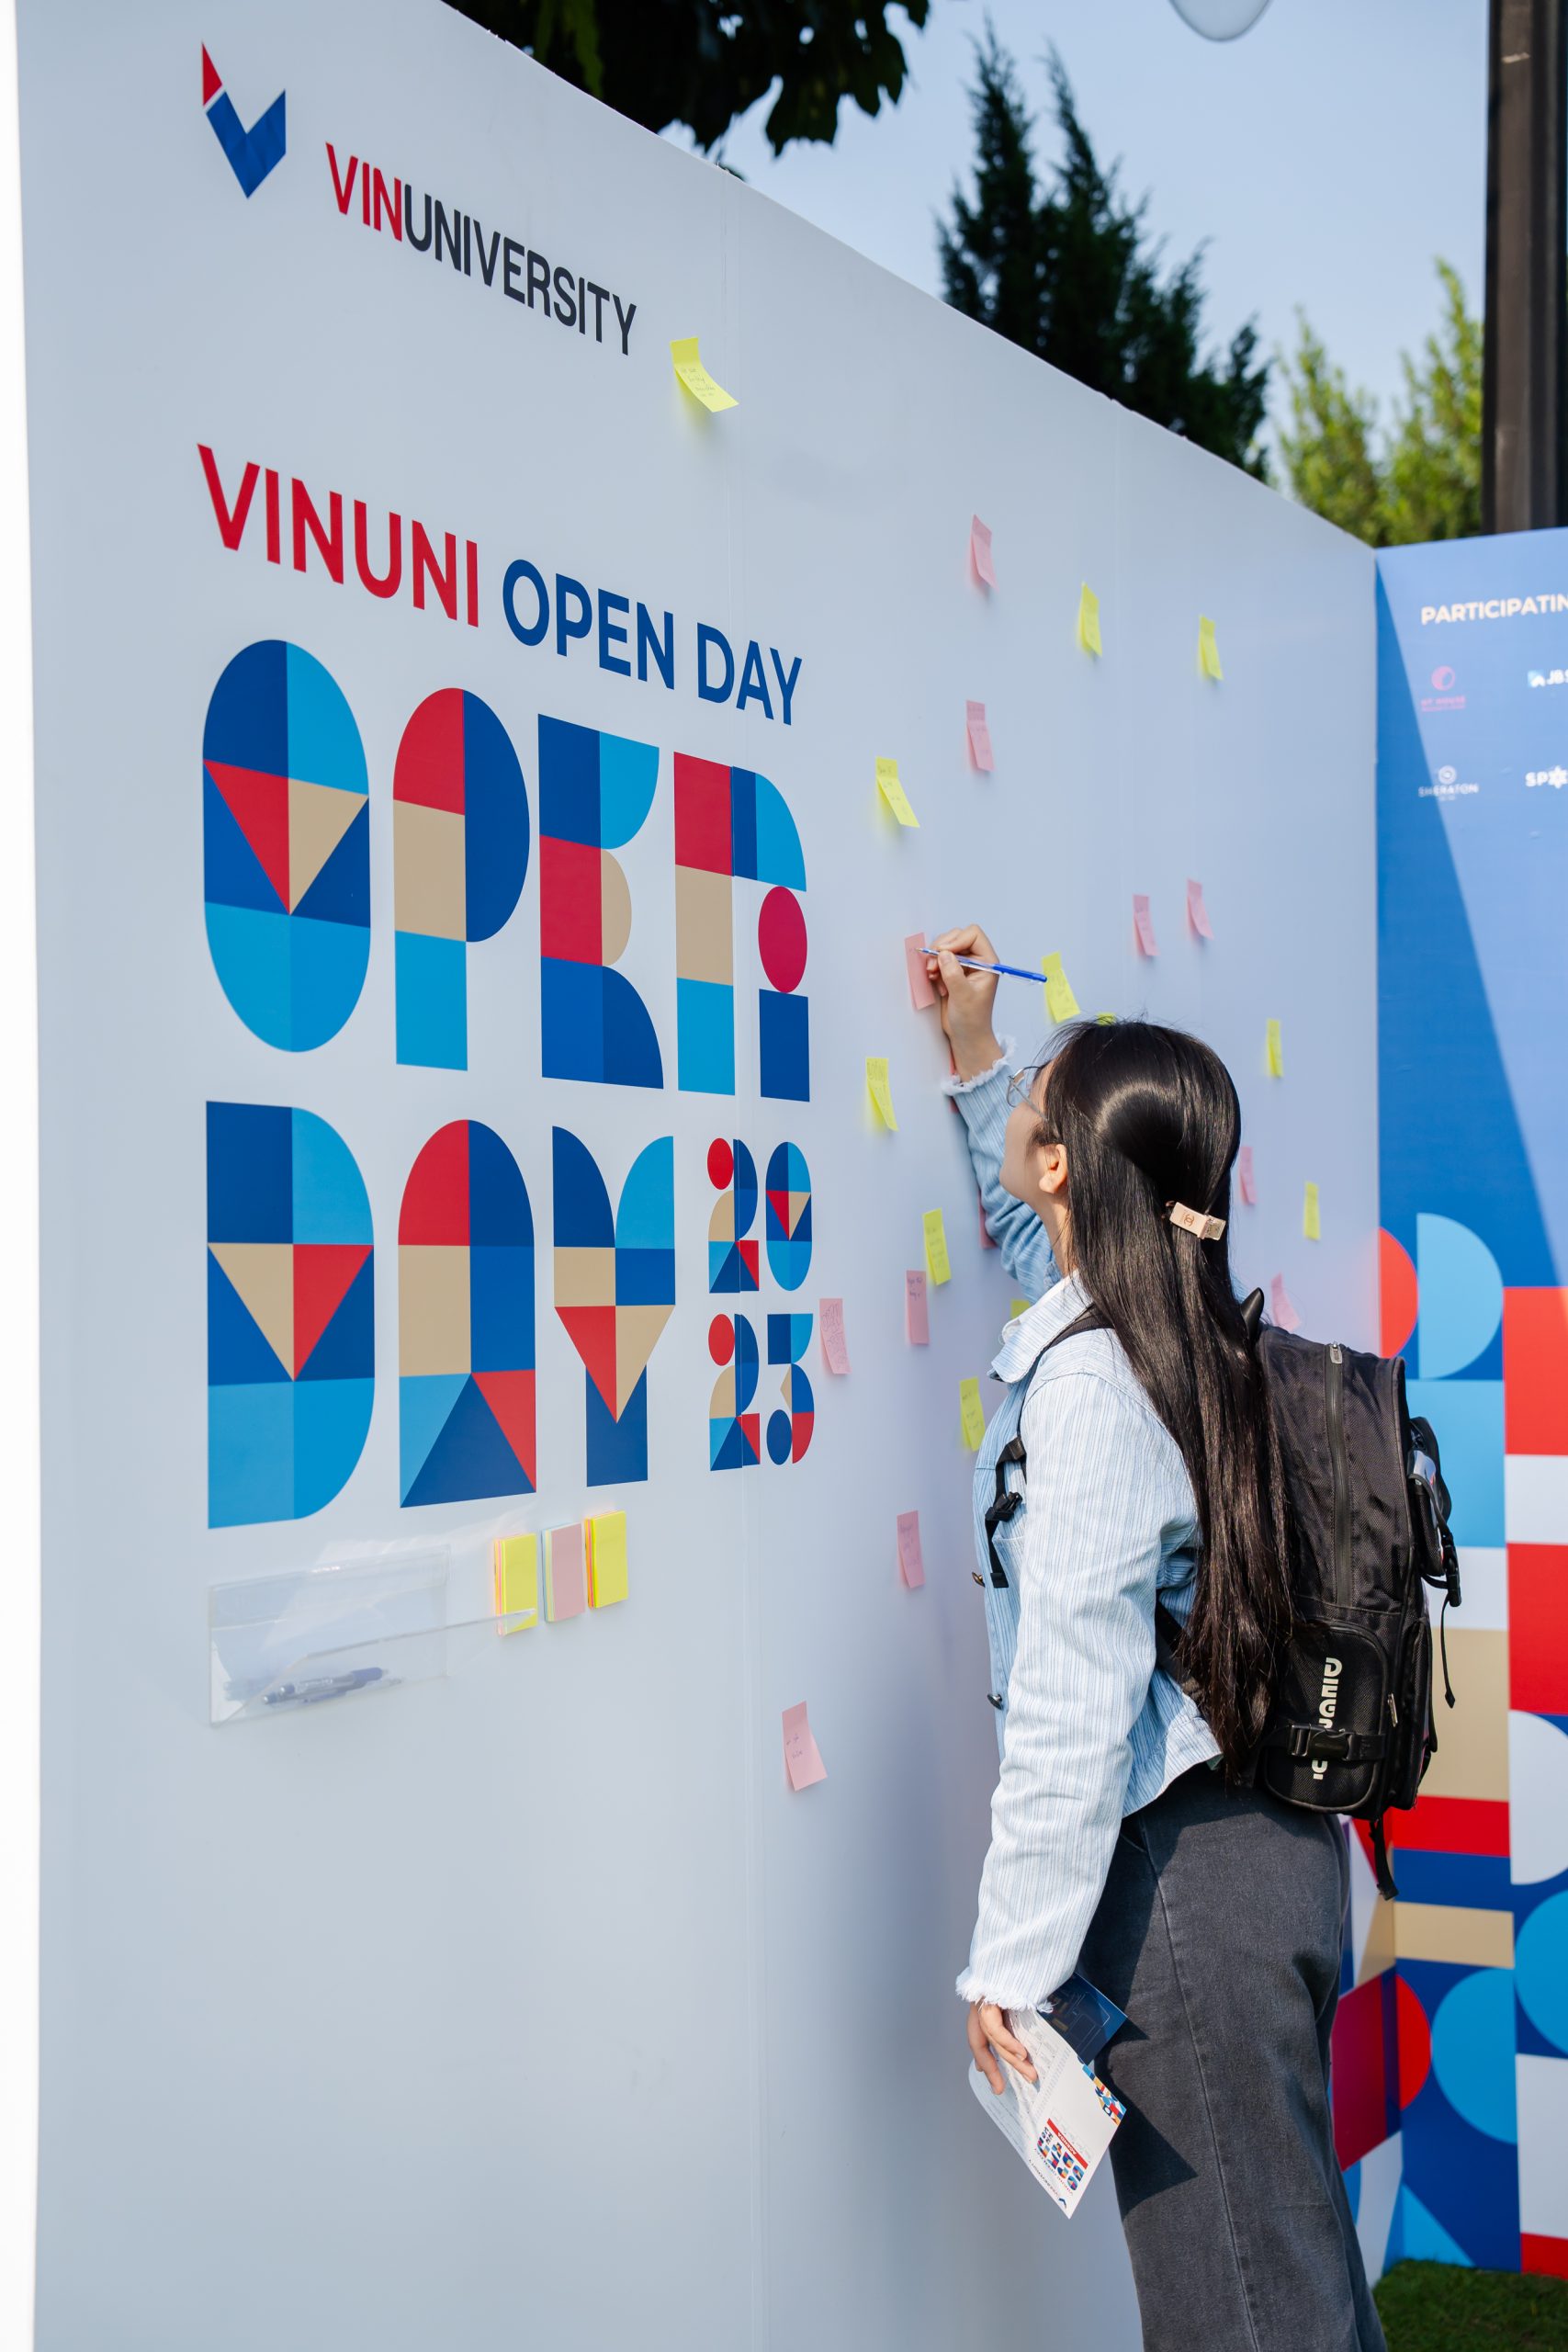 A look back on VinUni Open Day 2023